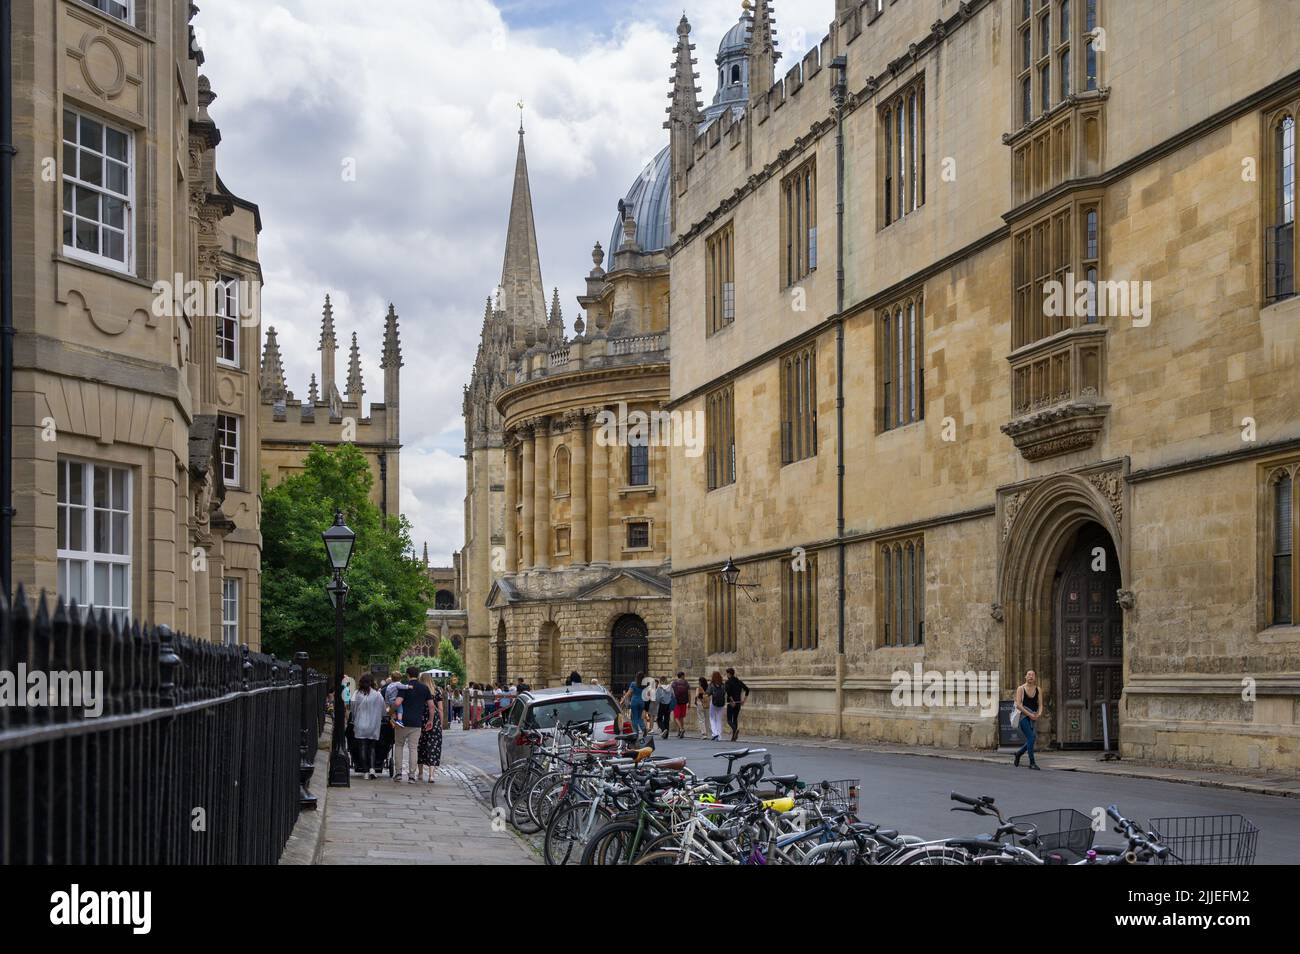 View down Catte Street, with the Radcliffe Camera, Bodleian Library and University Church of St Mary the Virgin, Oxford, UK Stock Photo